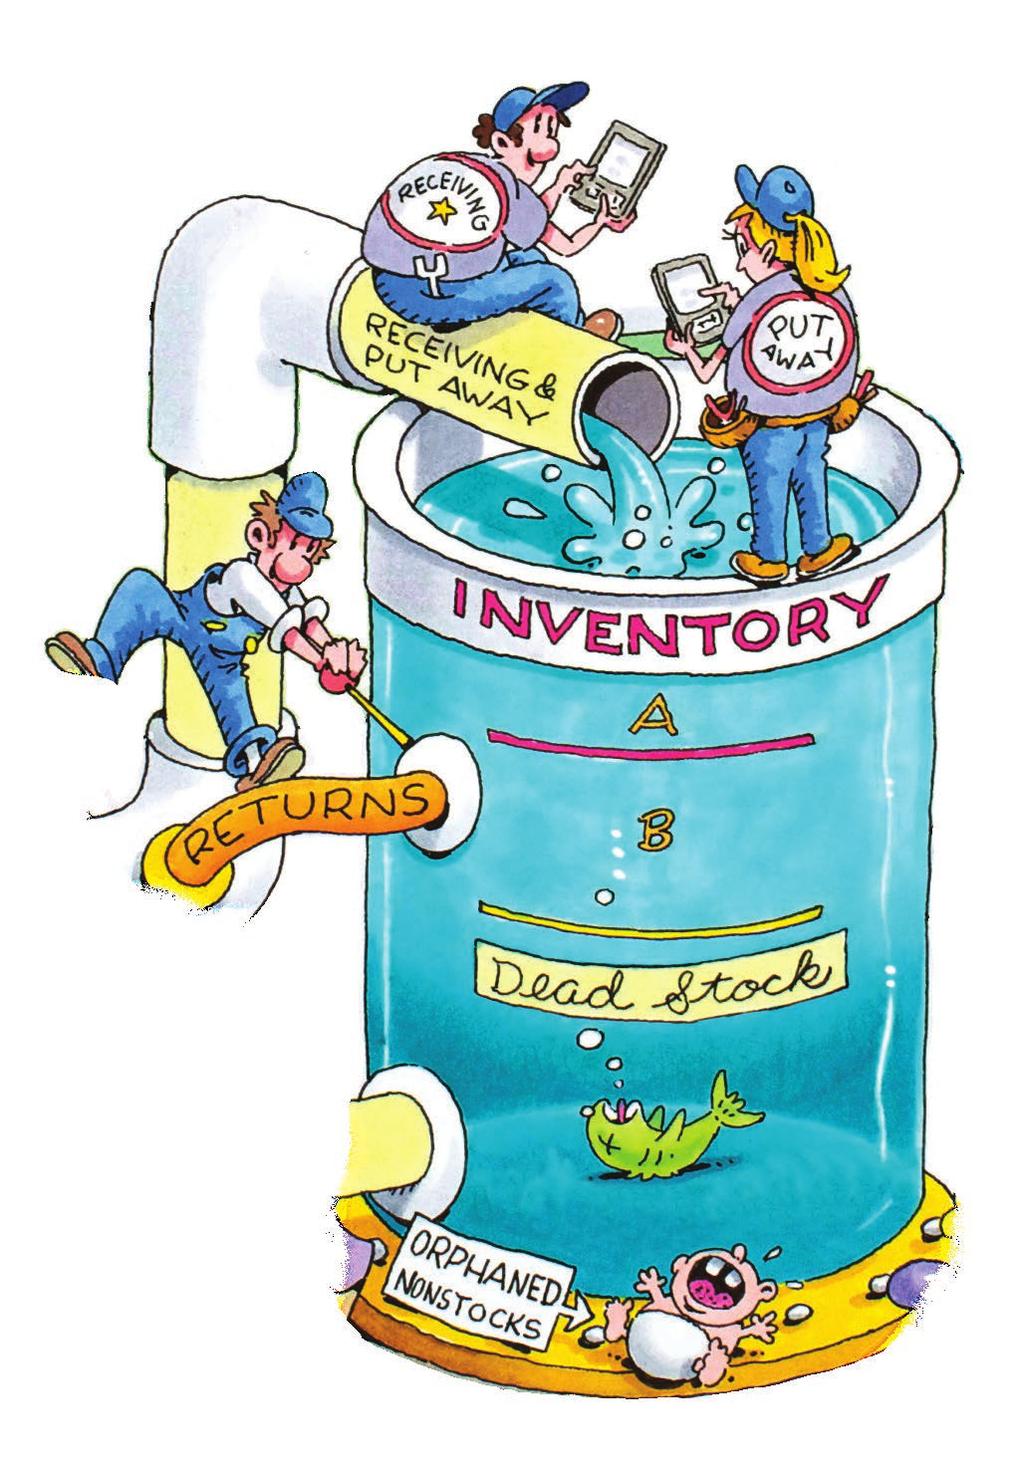 Developing intelligent inventory management What if you could solve the perennial puzzles of dead stock, orphaned nonstocks, and other daily challenges that make it so difficult to strike the